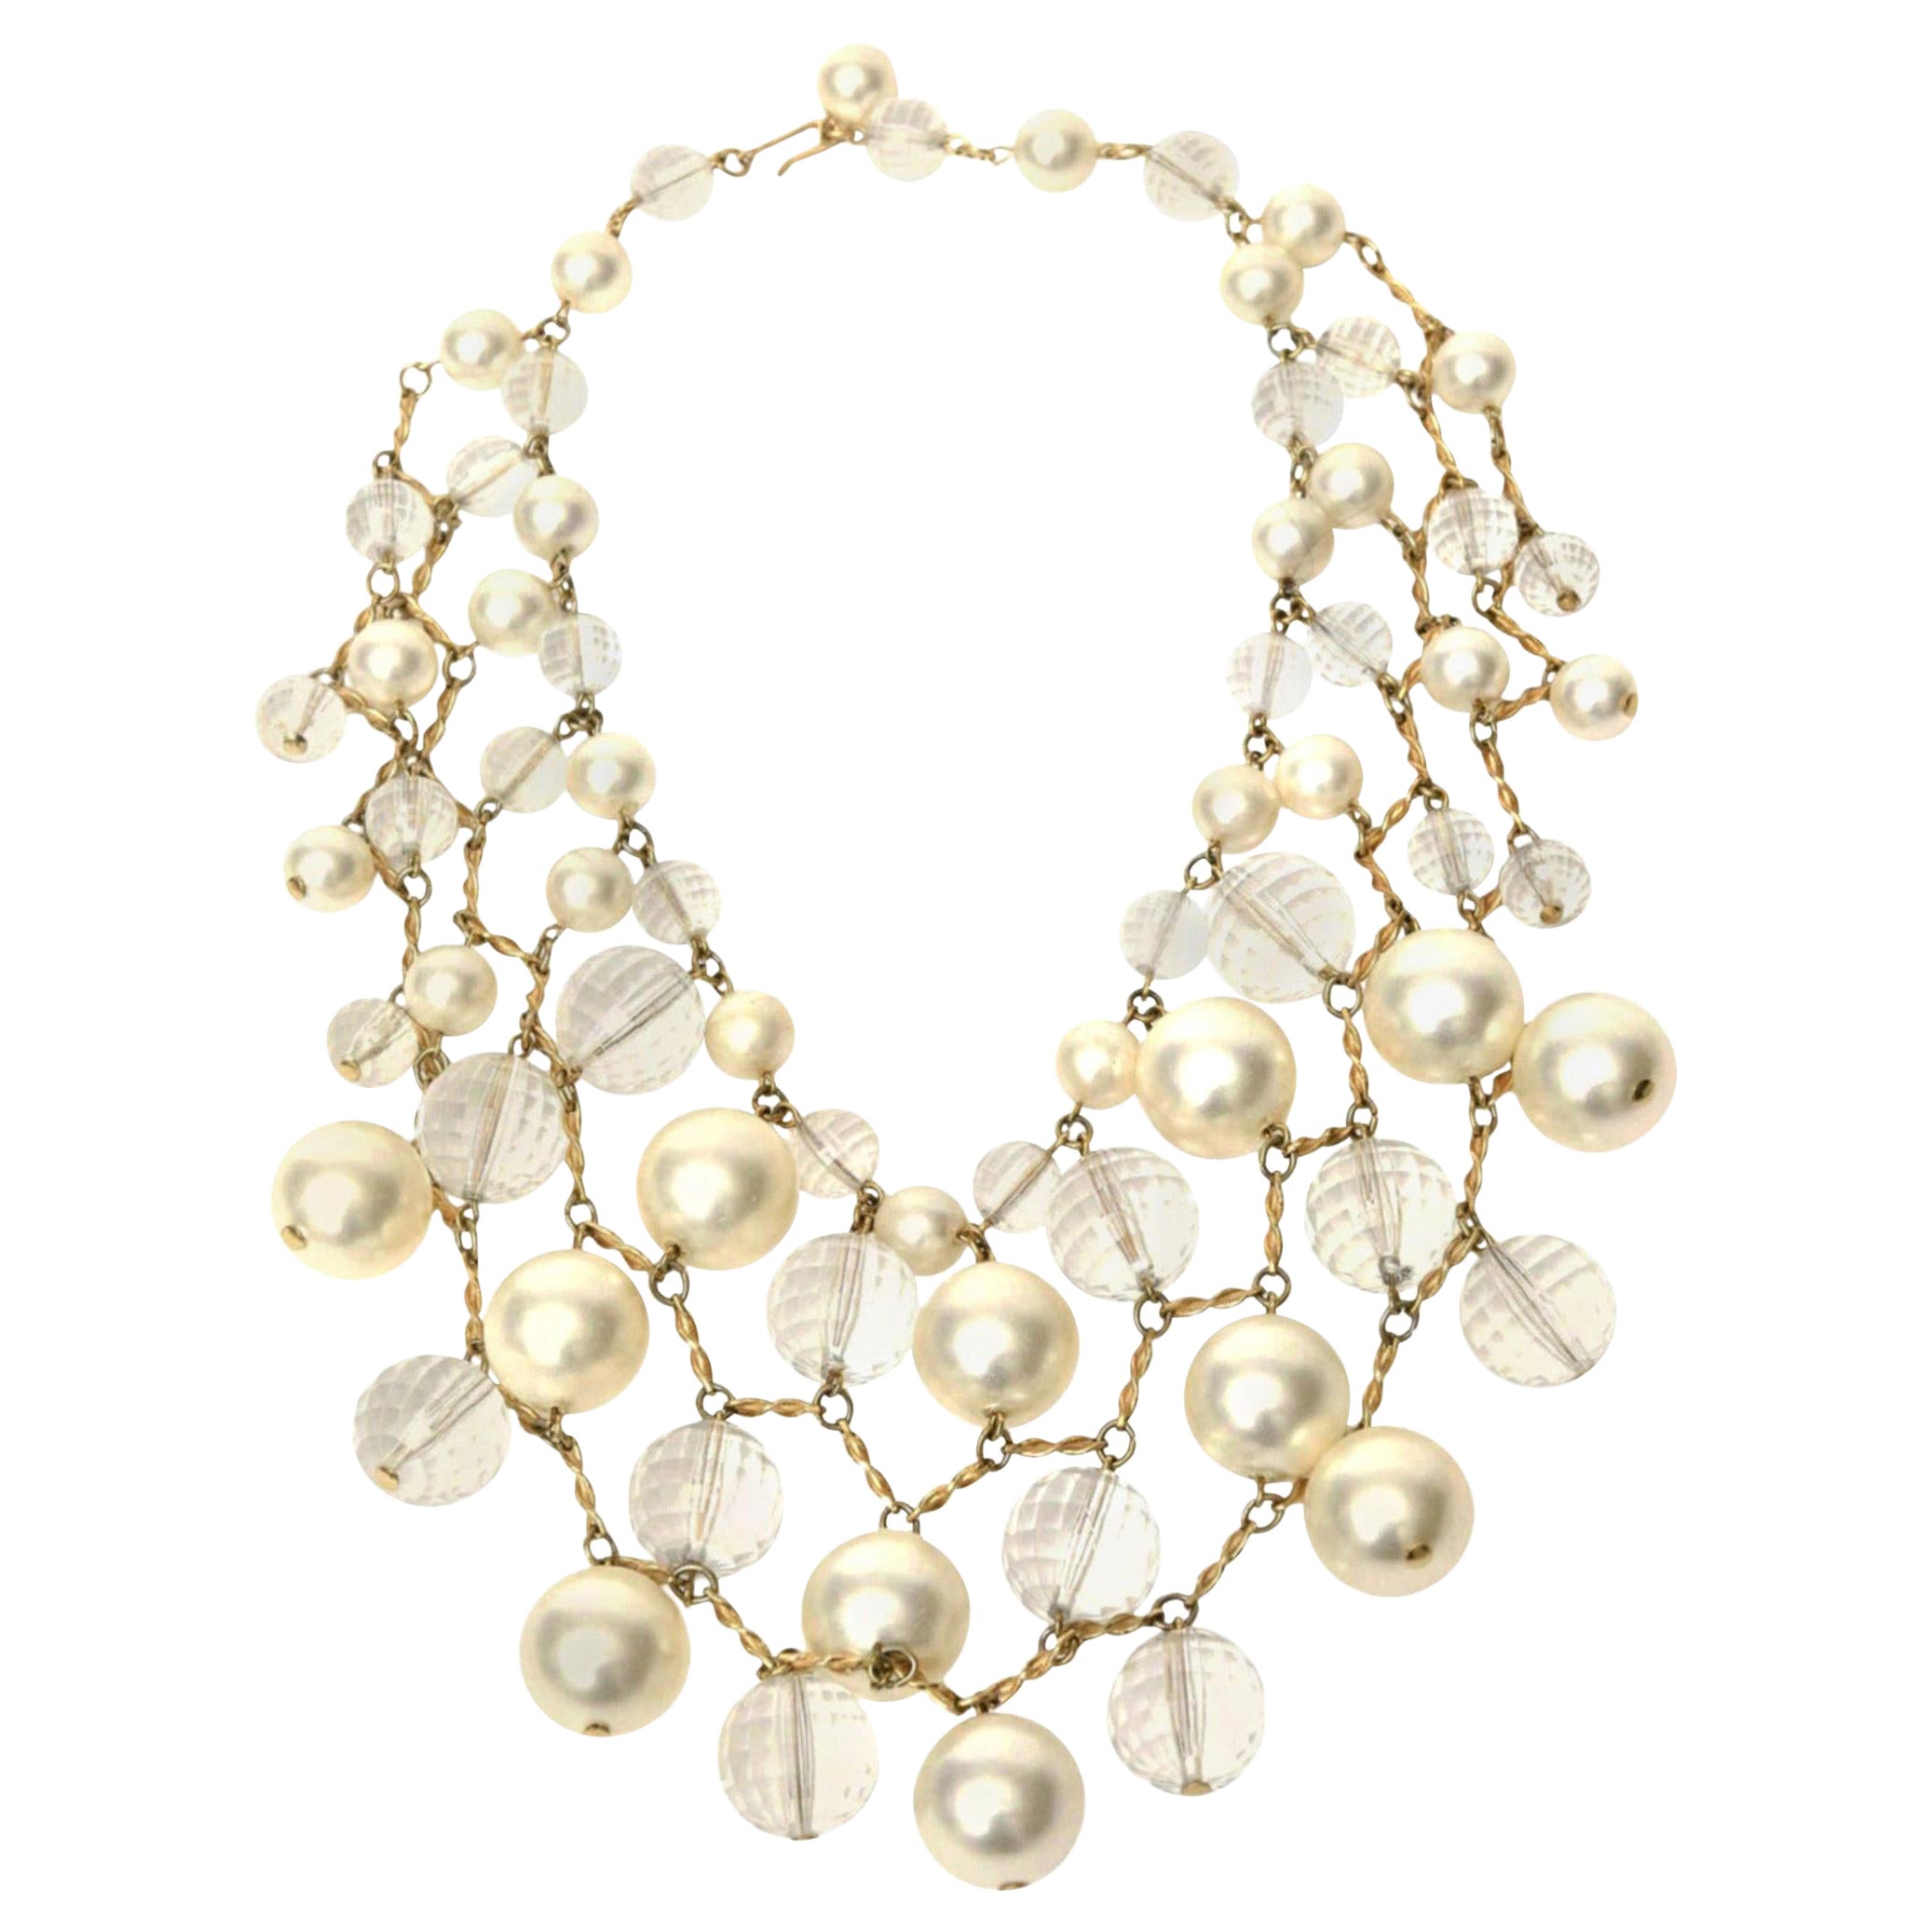 Vintage Faux Pearl, Faceted Lucite and Brass Bib Multi Strand Collar Necklace